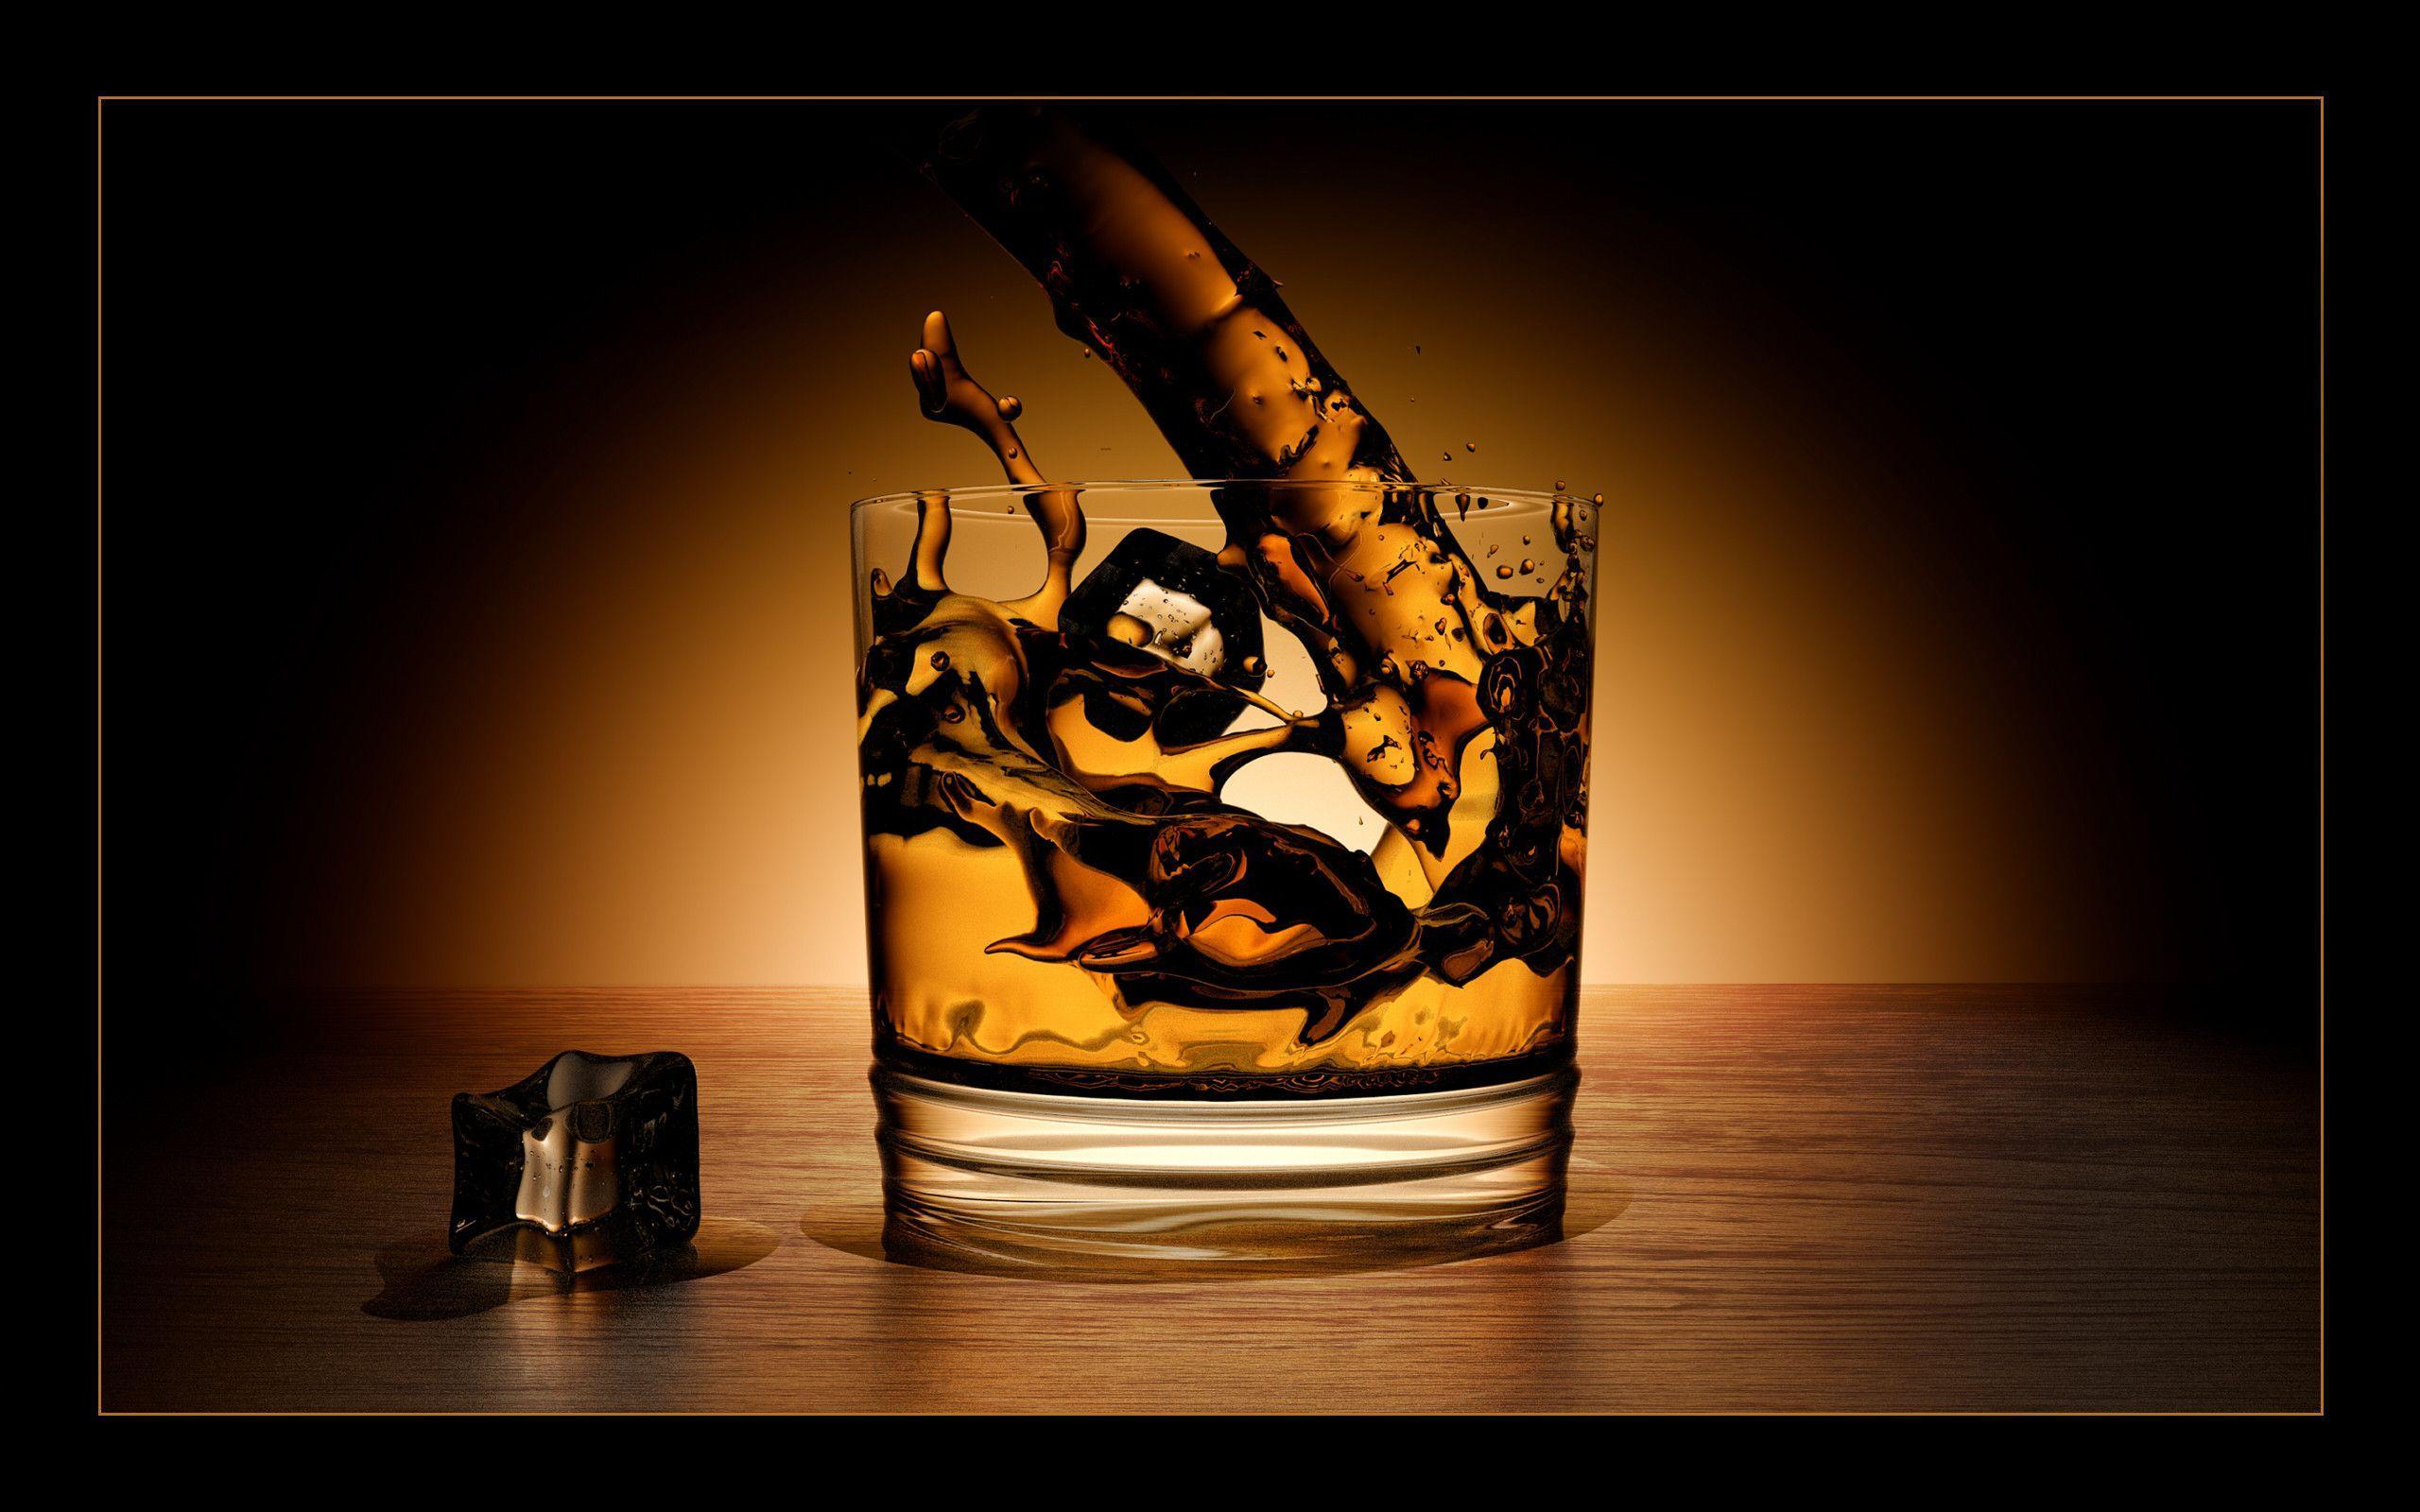 TheDalmore Whisky by VitalyZorkin  Photographer advertising Macallan  whiskey bottle Photo and video